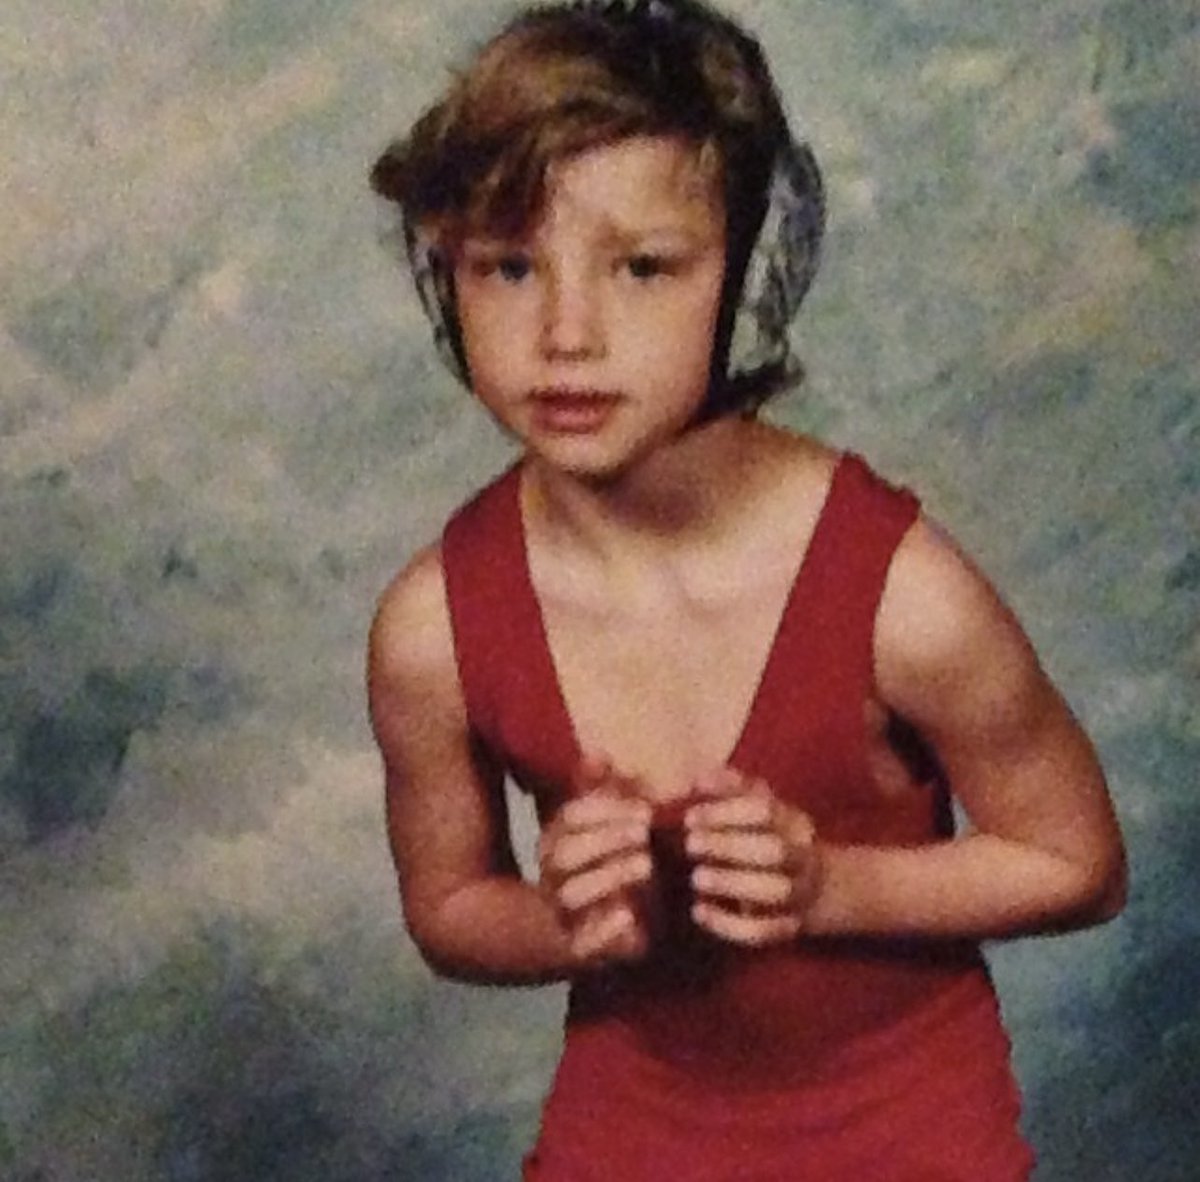 @nascarcasm My man @SageKaram been messin dudes up since way back. Gonna have to take my man Sage on this one. 🤷🏼‍♂️ said what I said. Wrestling since a kid over some boxing classes (or maybe just one for the social post) all day.